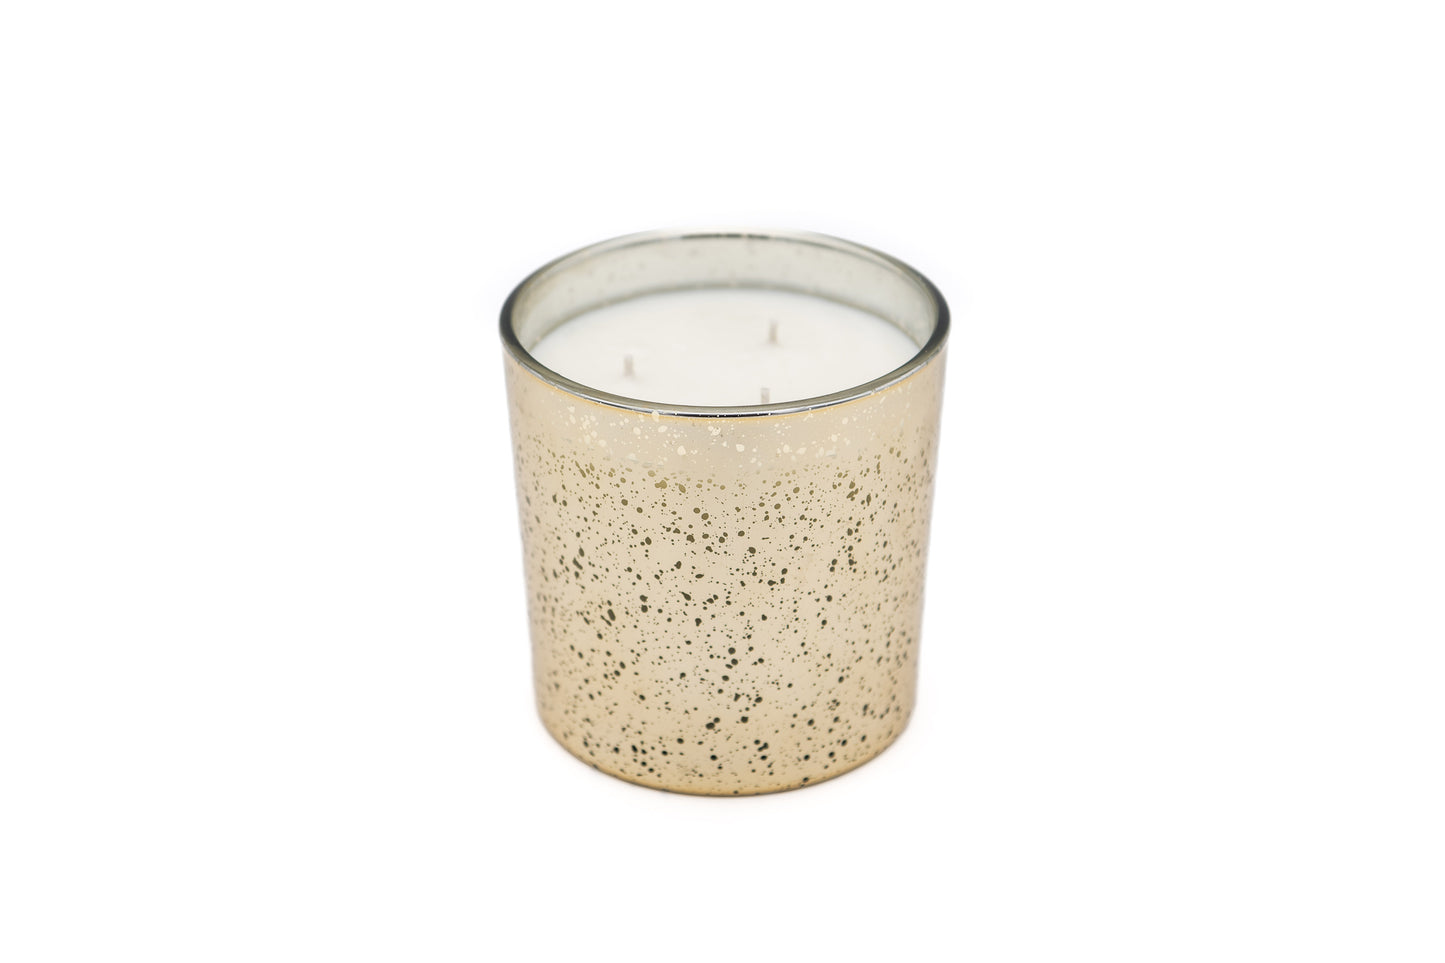 Christmas candle - Large 3 wick candle.